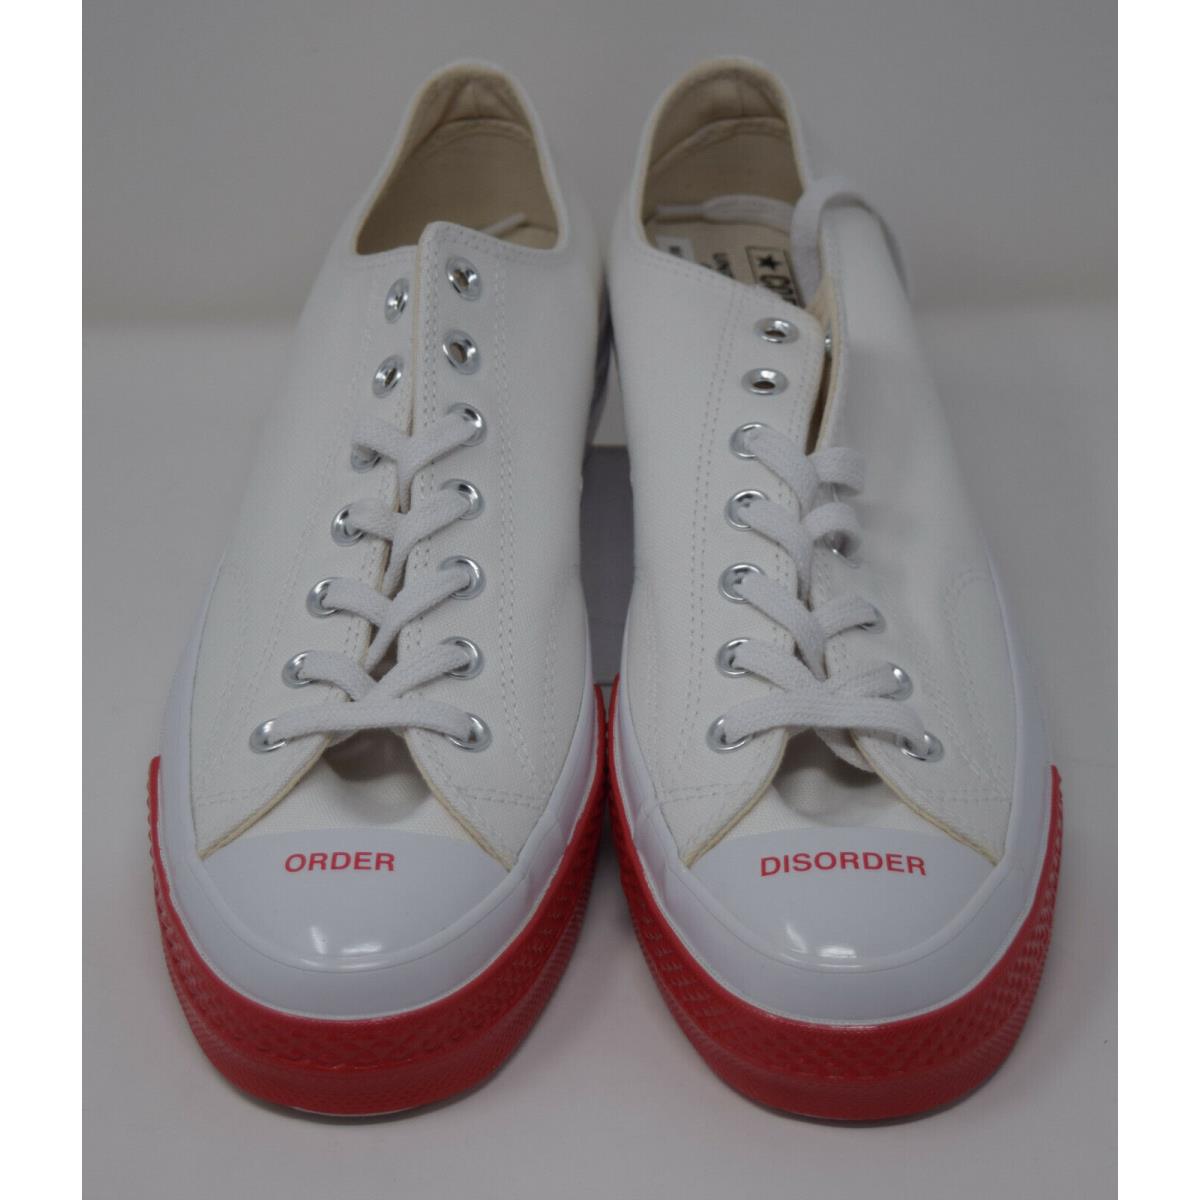 Converse 163013C Chuck 70 Ox White Red Shoes Sneakers 11 US